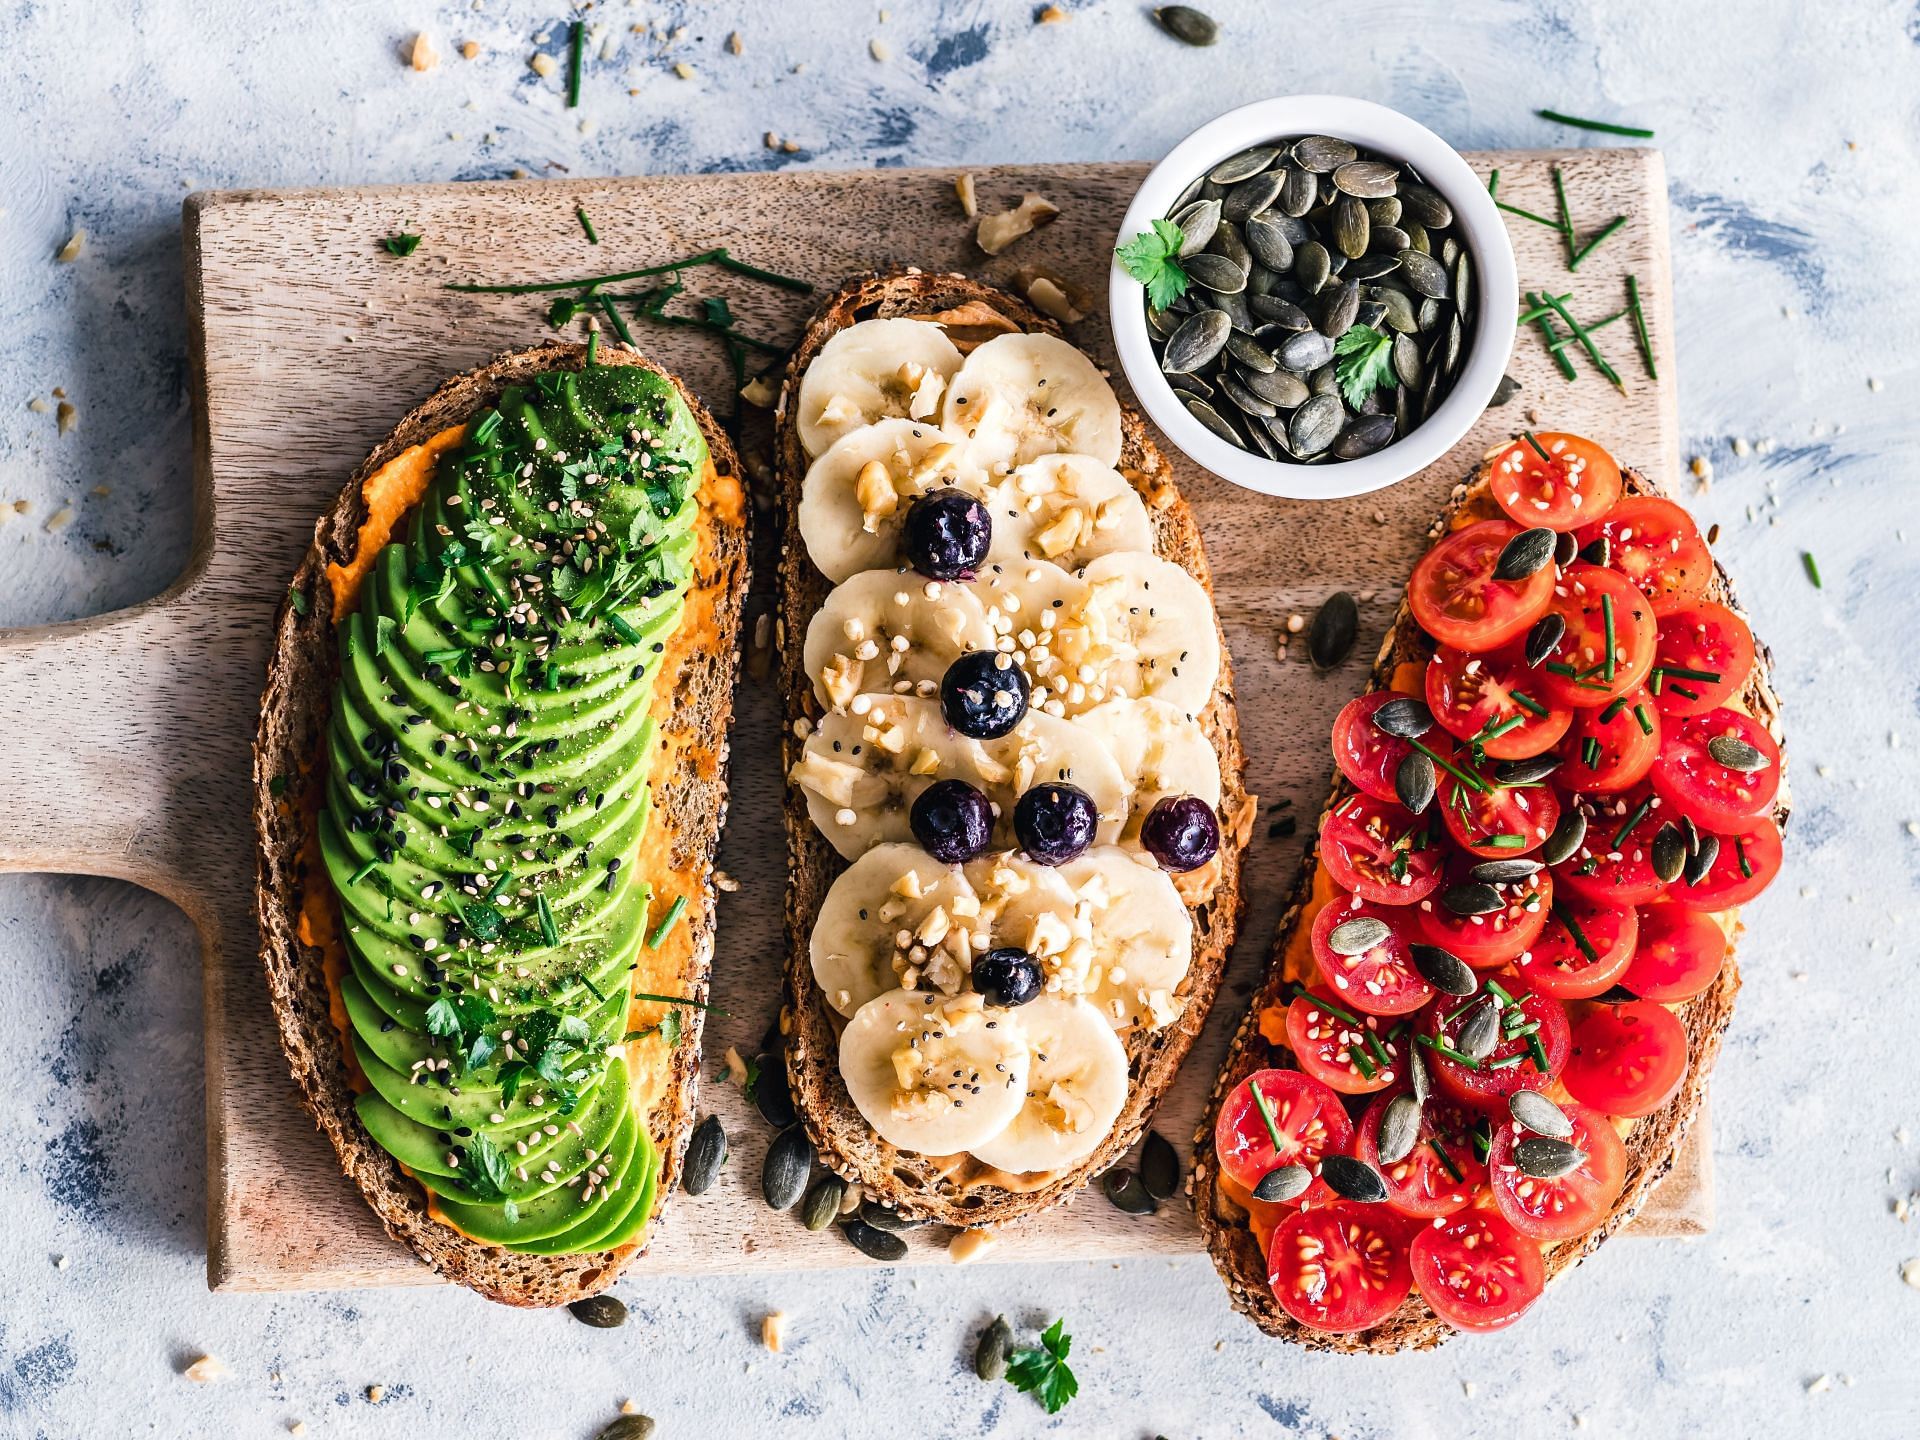 A plant-based diet can help you thrive as an athlete. (Image via unsplash/Ella Olsson)